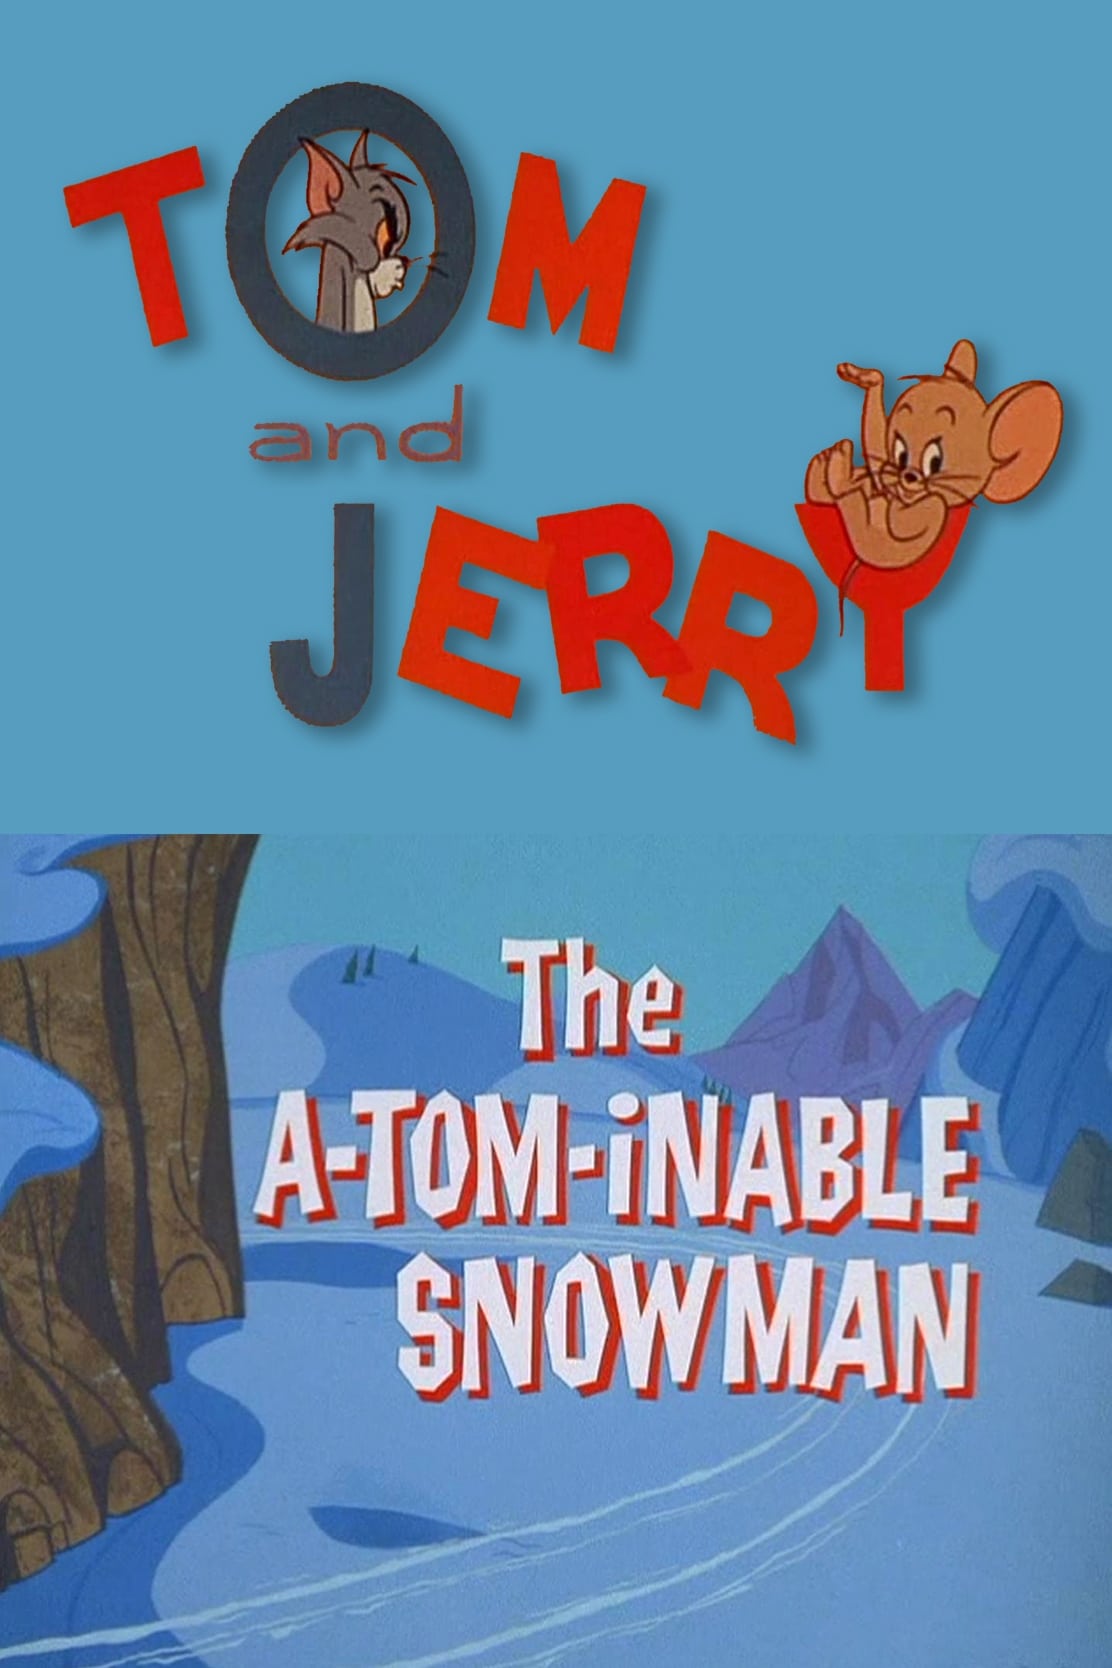 The A-Tom-inable Snowman (1966)